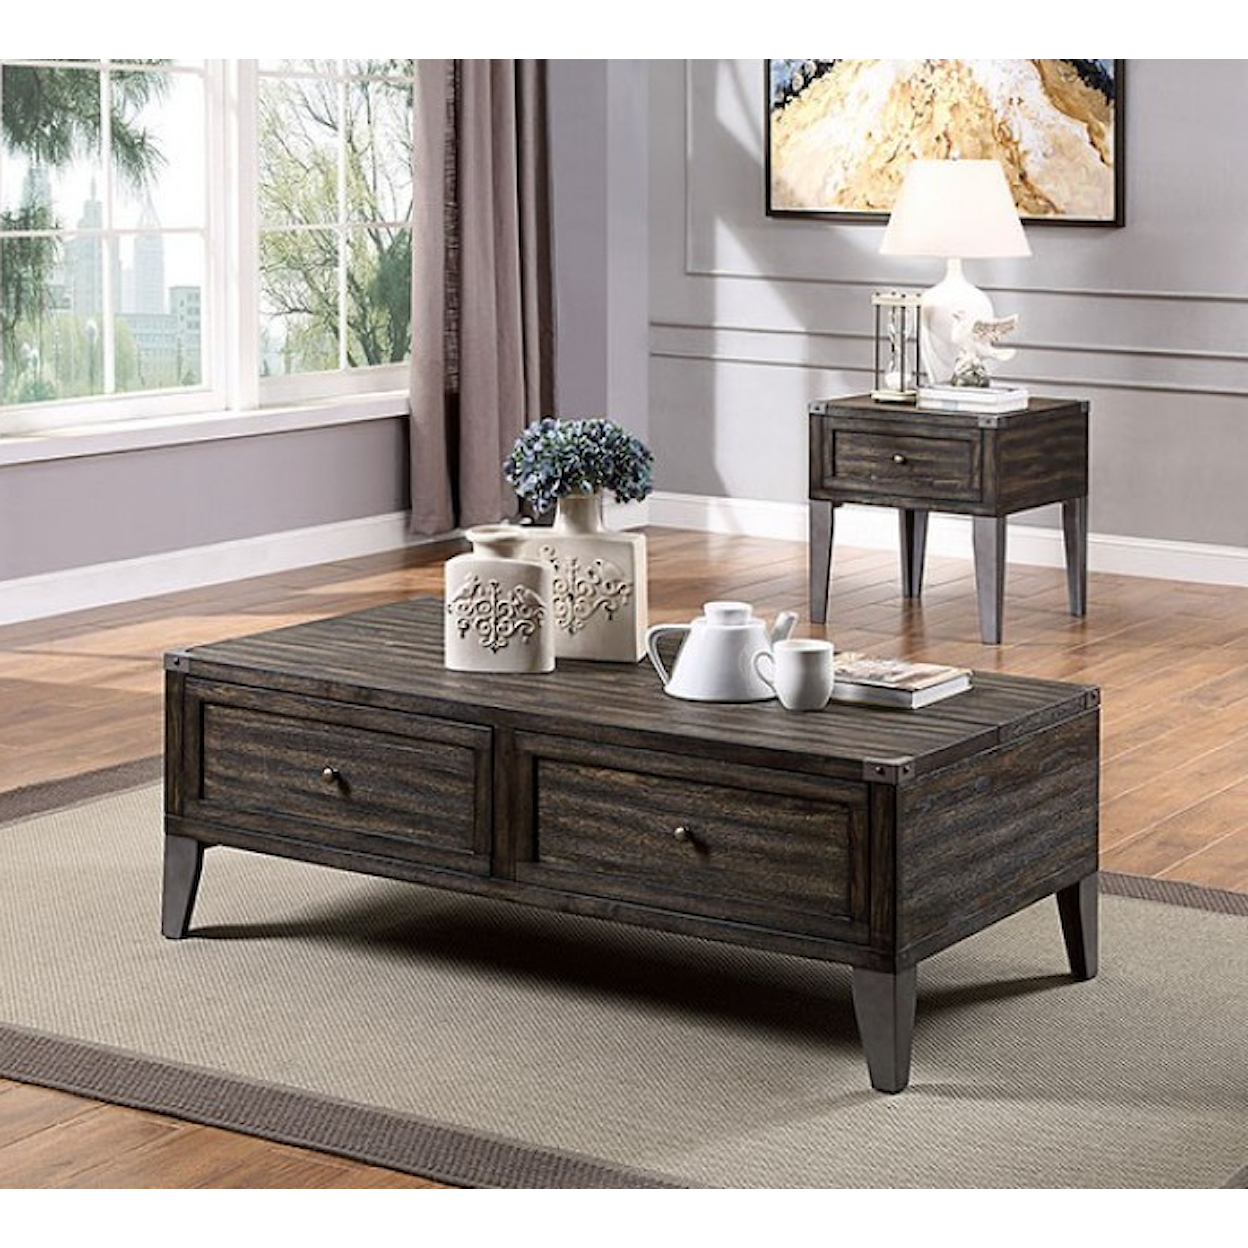 Furniture of America Piedmont Coffee Table